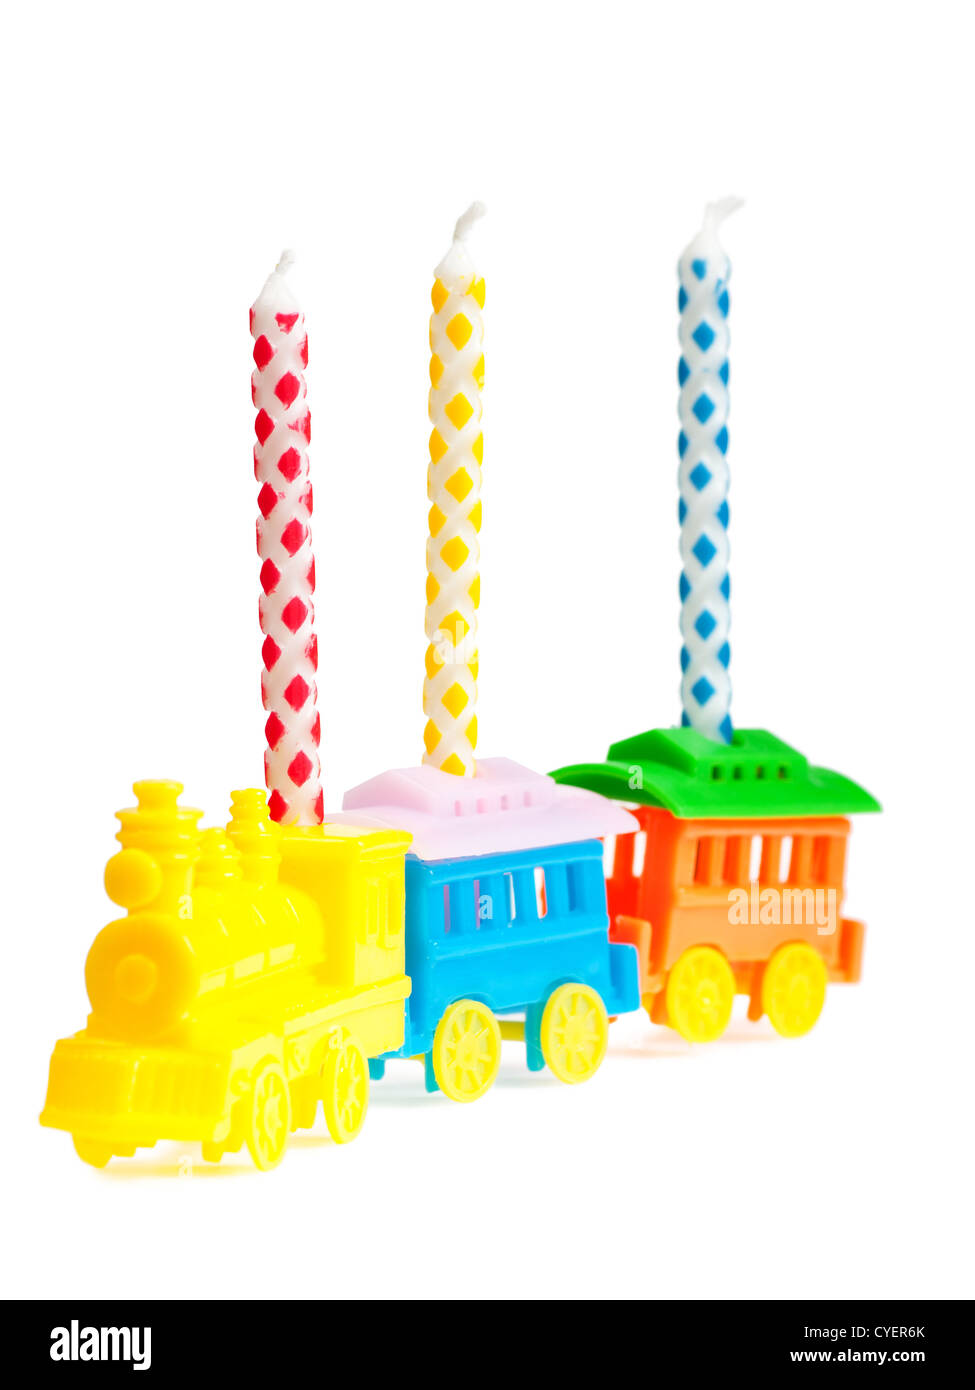 Macro view of three birthday candles in a train-shaped support Stock Photo